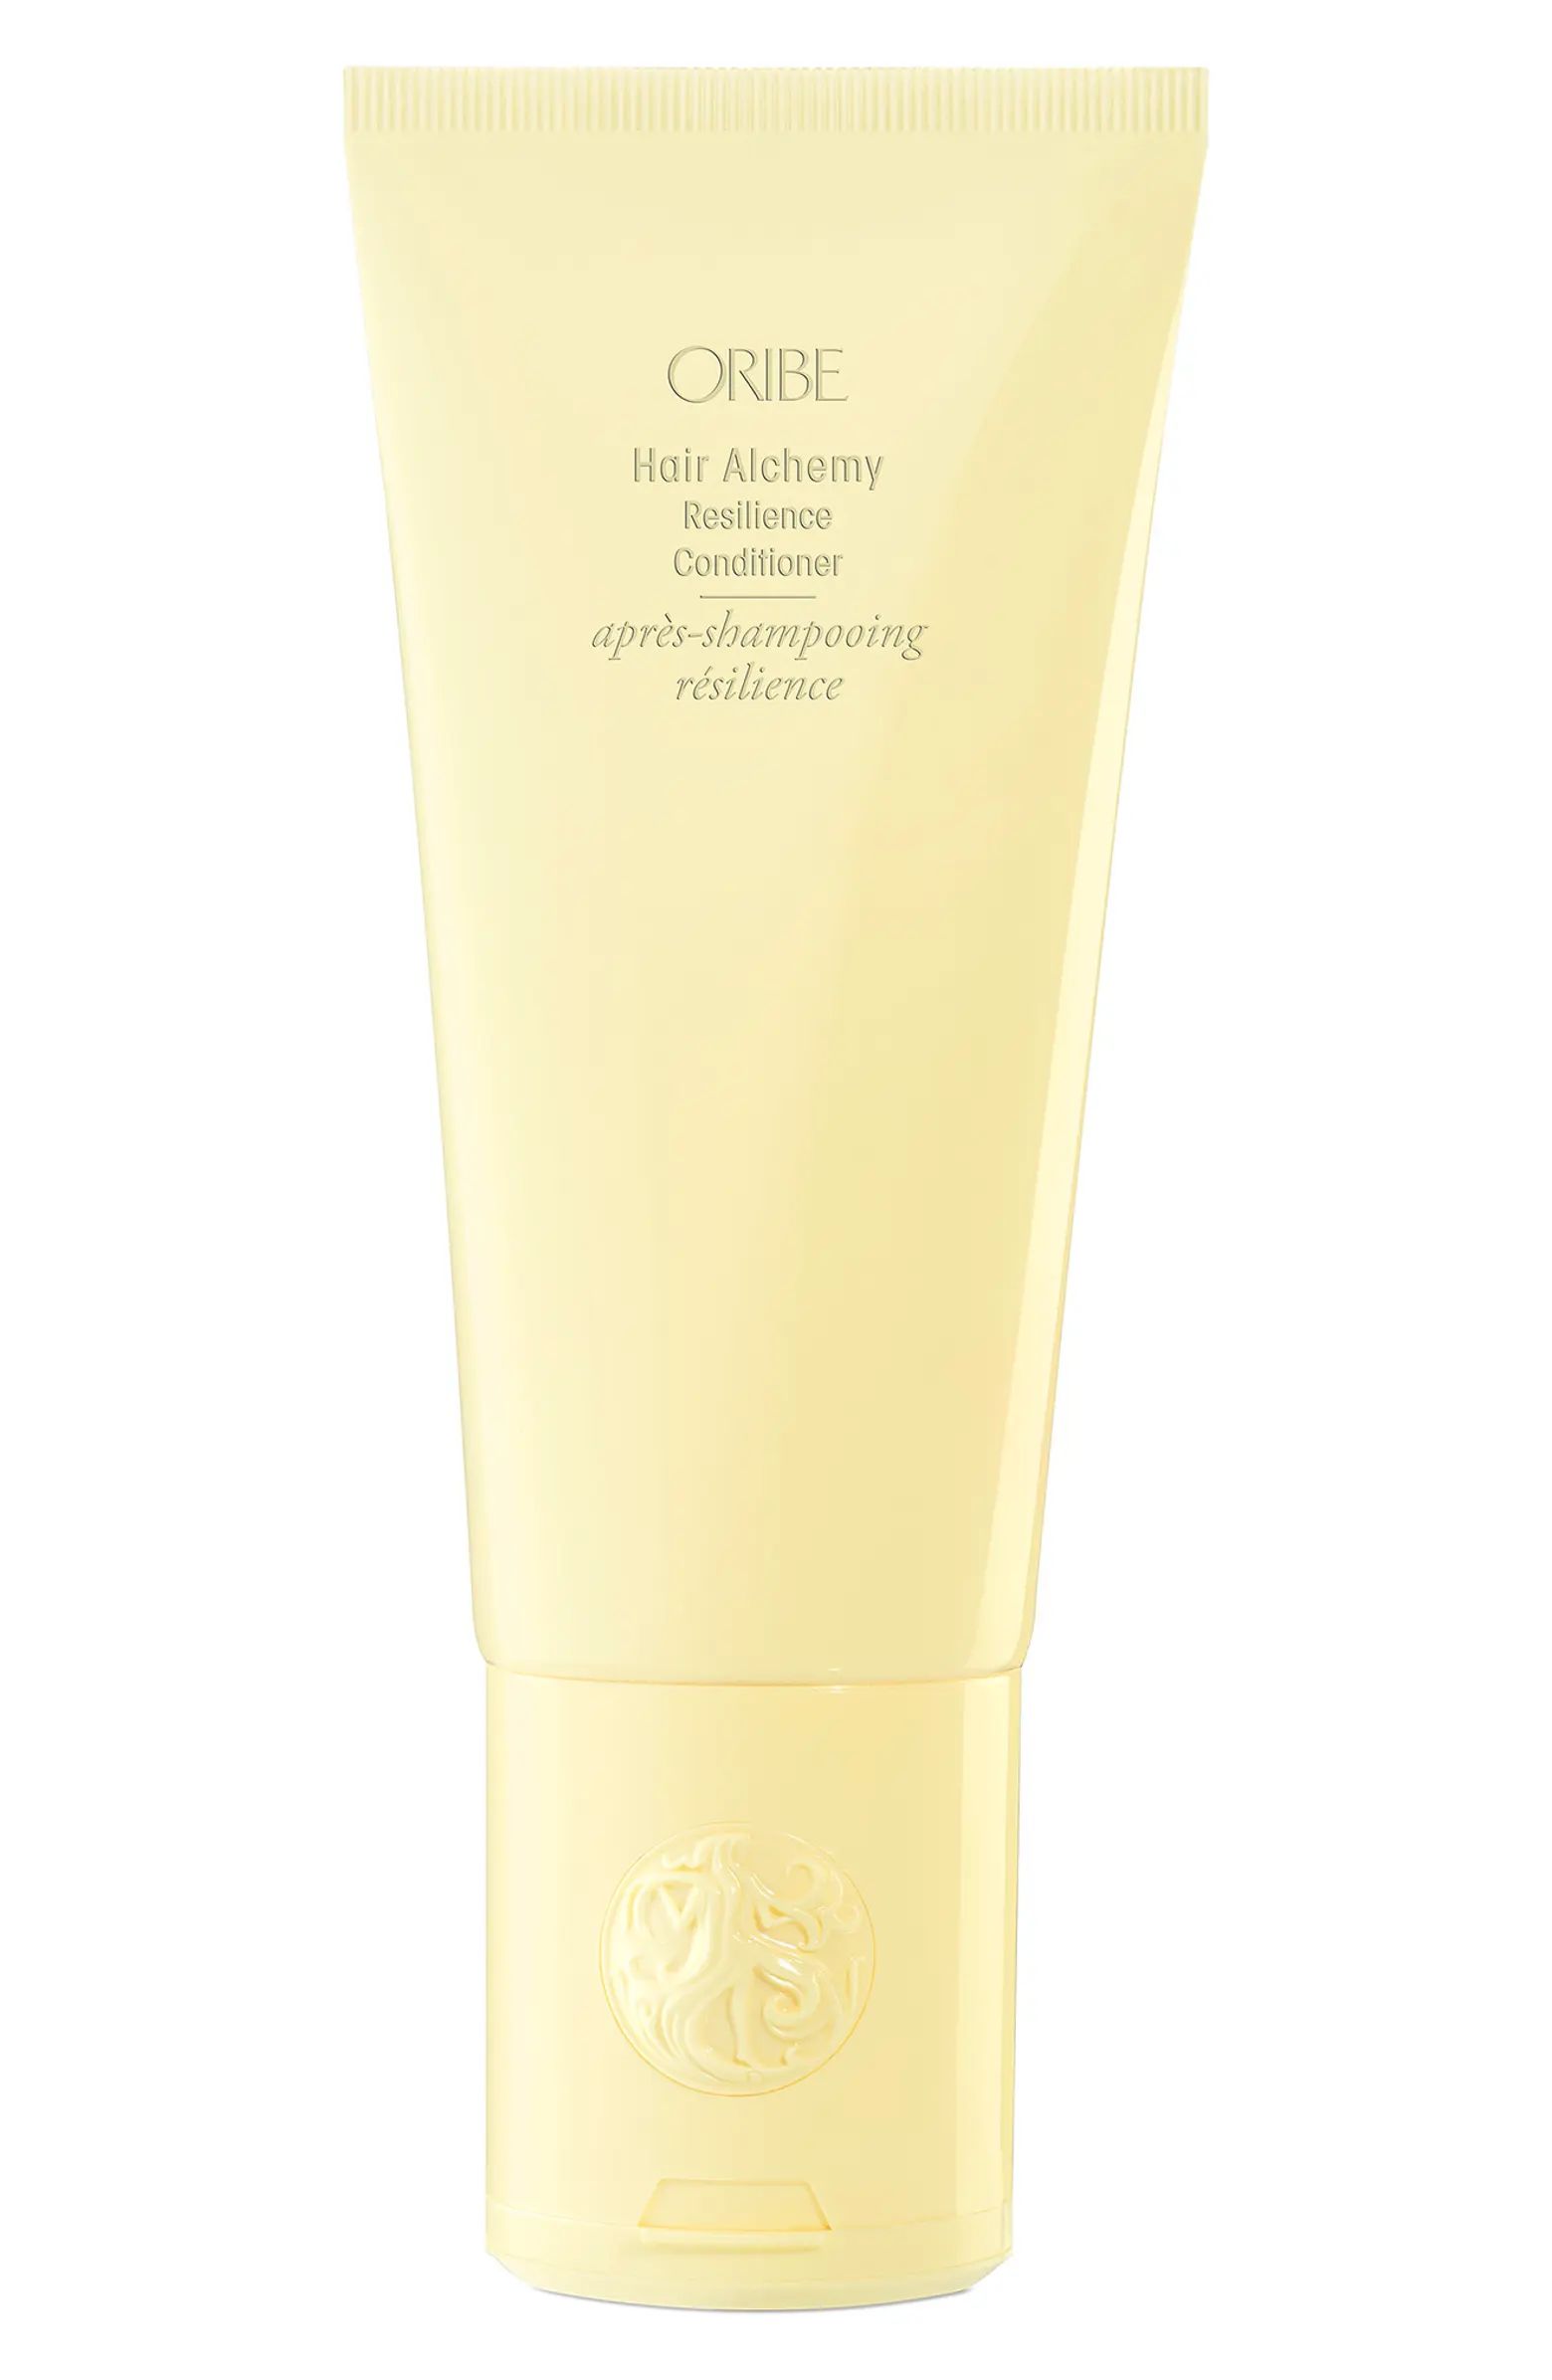 Oribe Hair Alchemy Resilience Conditioner | Nordstrom | Nordstrom